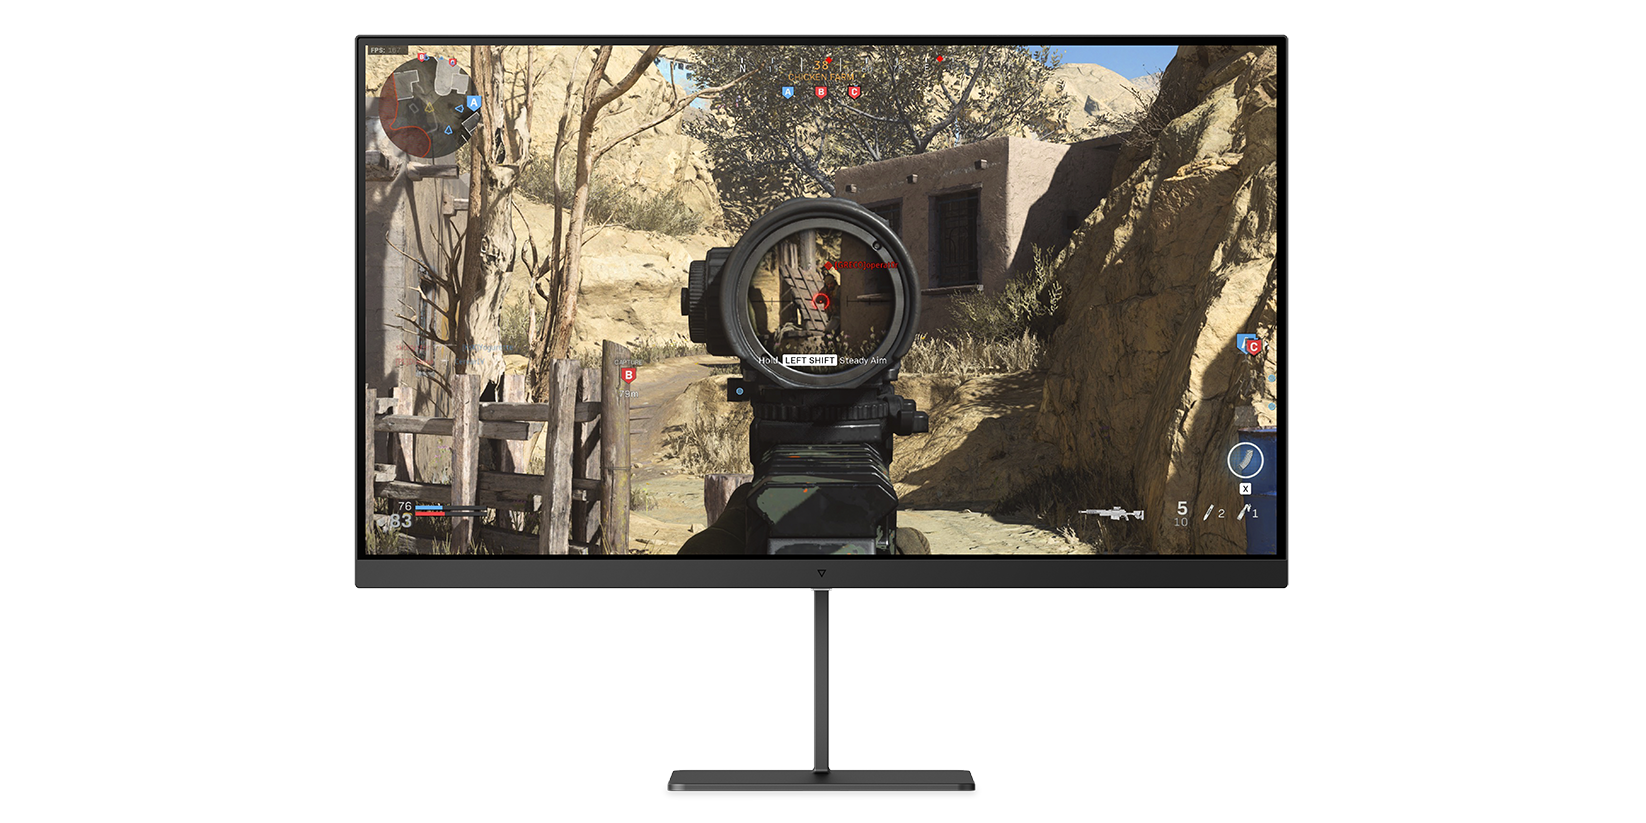 Eve Announces World First Ips 1440p 240 Hz Gaming Monitor Blur Busters